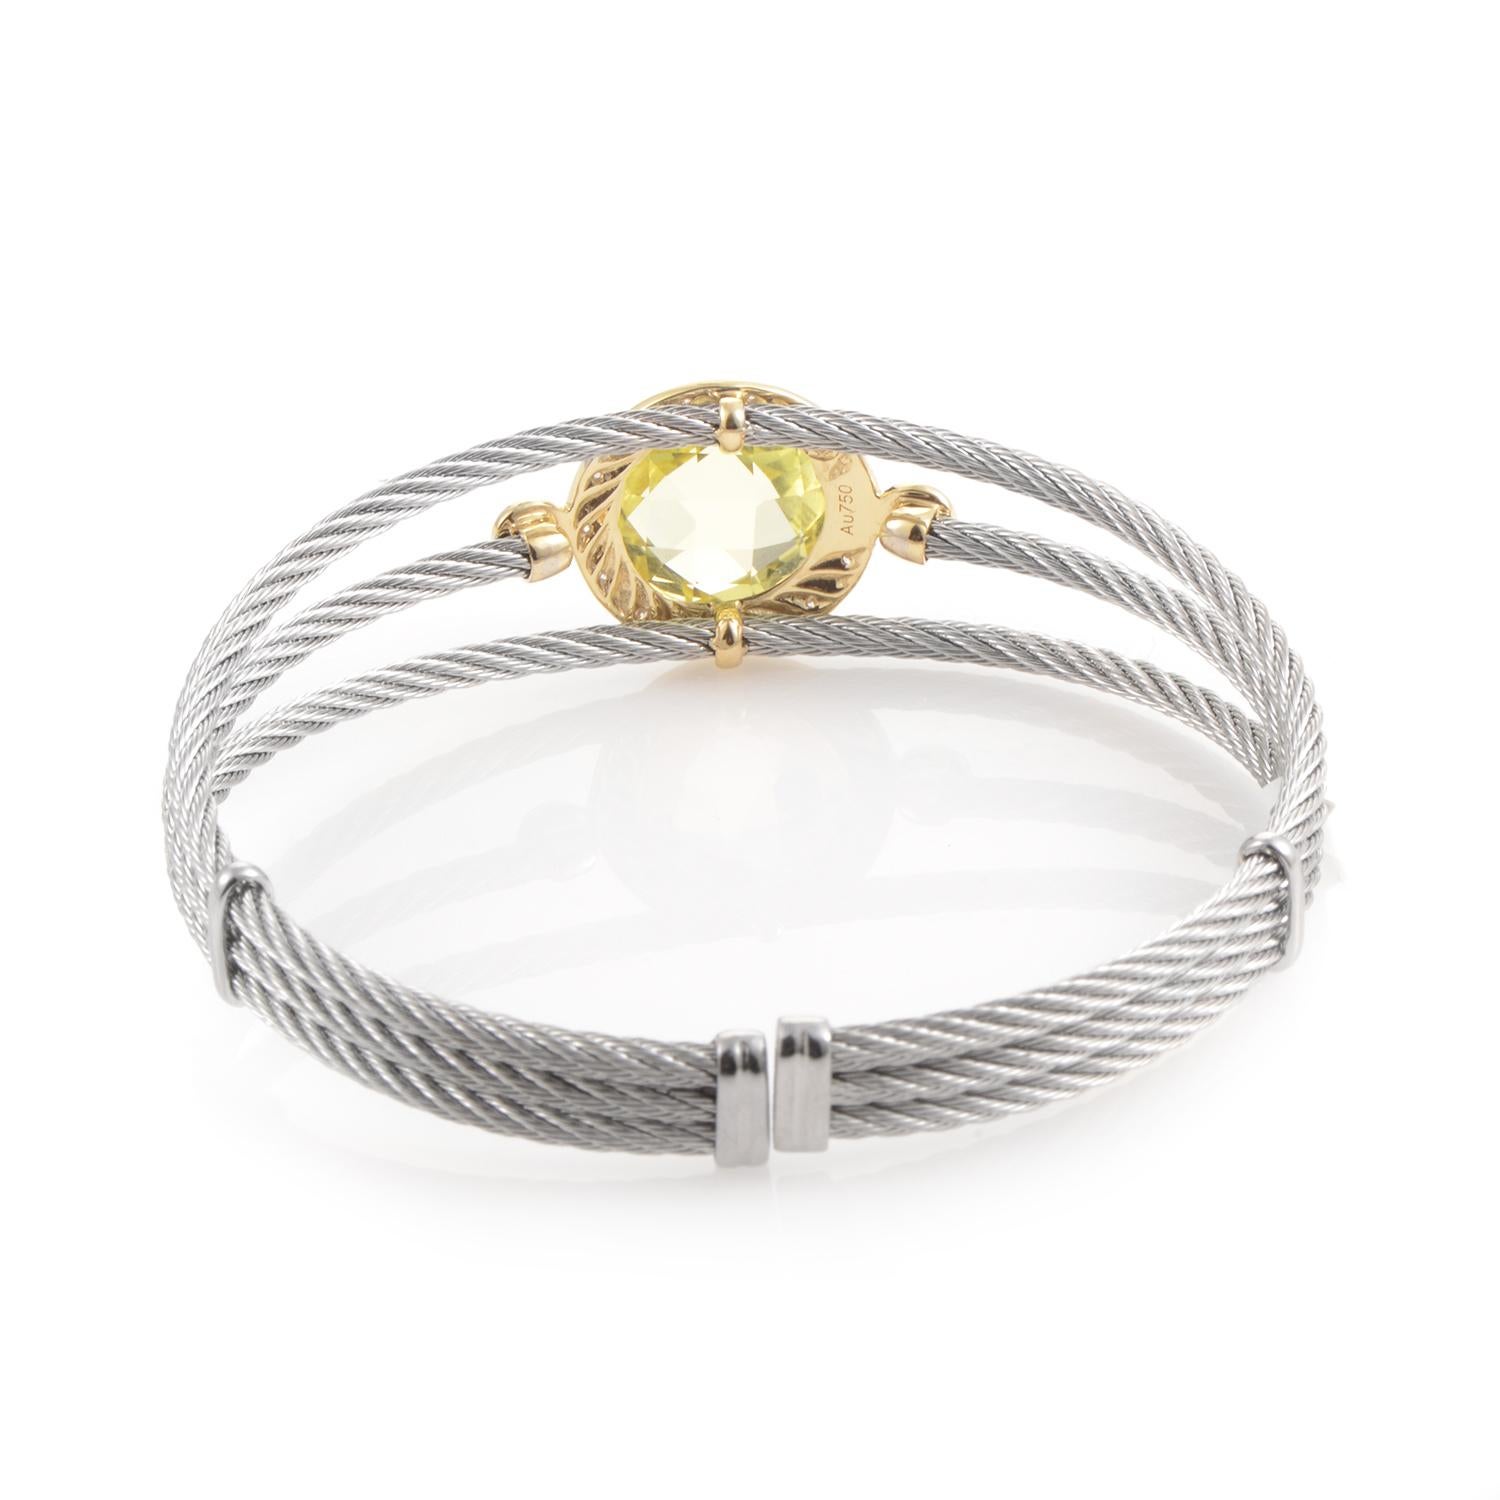 From Charriol's Celtic Classique Collection, this stainless steel Celtic Cable Bracelet boasts a round lemon citrine stone surrounded by .10ct white diamonds in an 18K yellow gold setting.
